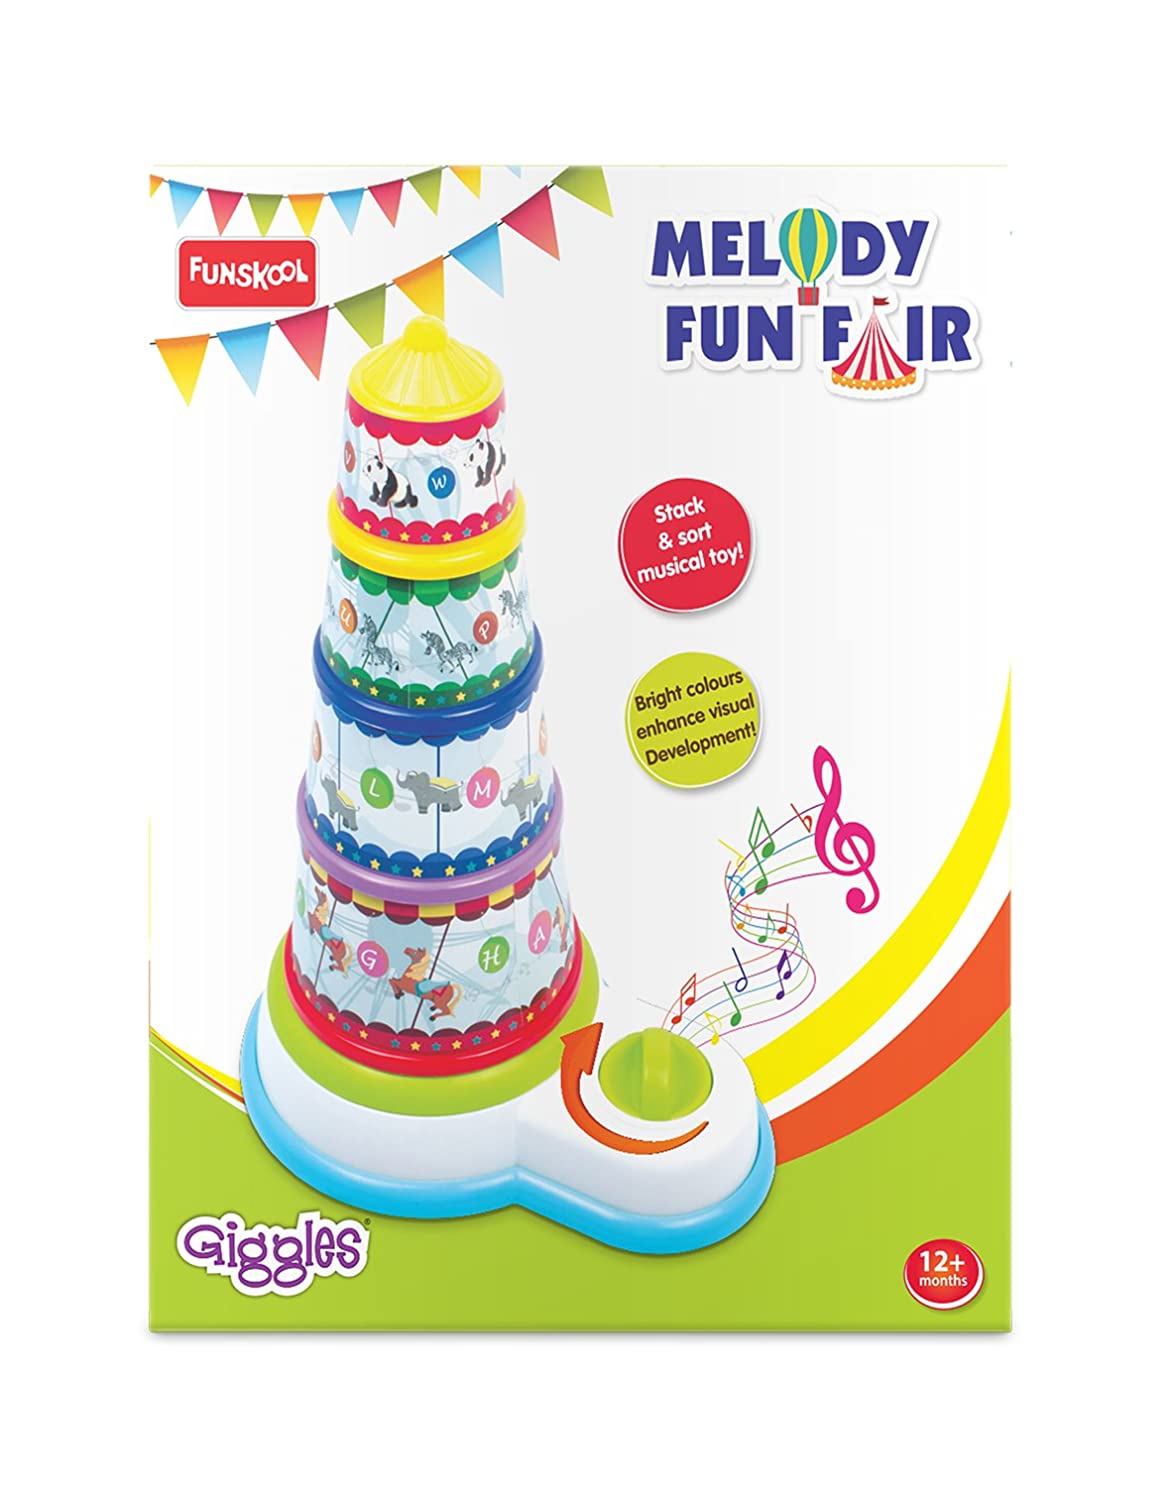 Funskool Giggles Melody Funfair , Multicolour Musical Stacking Toy